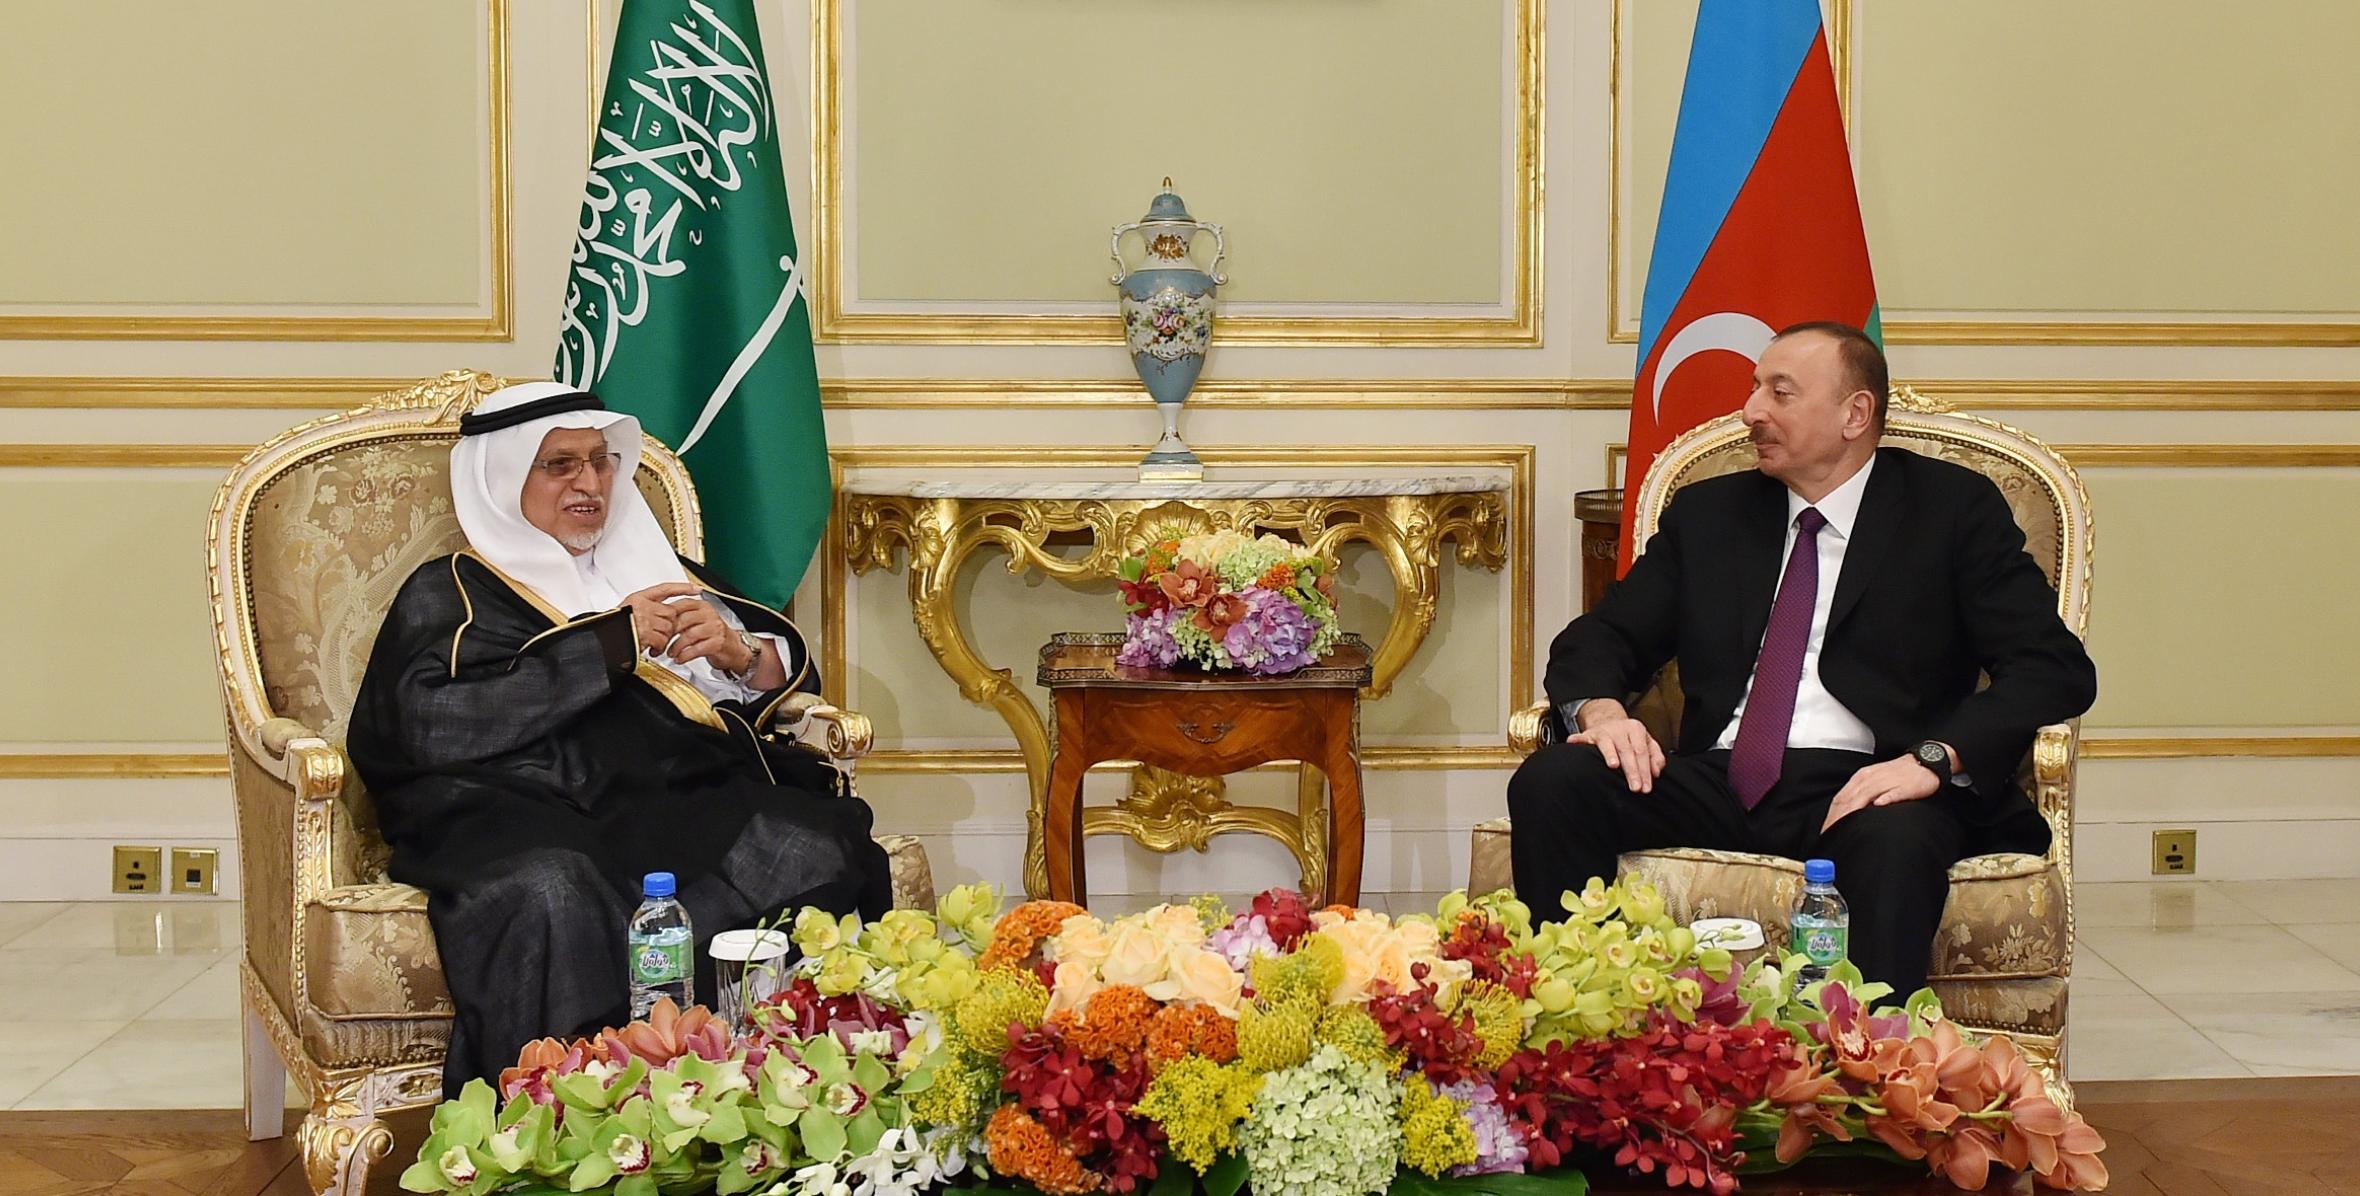 Ilham Aliyev met with the Chairman of the Council of Saudi Chambers